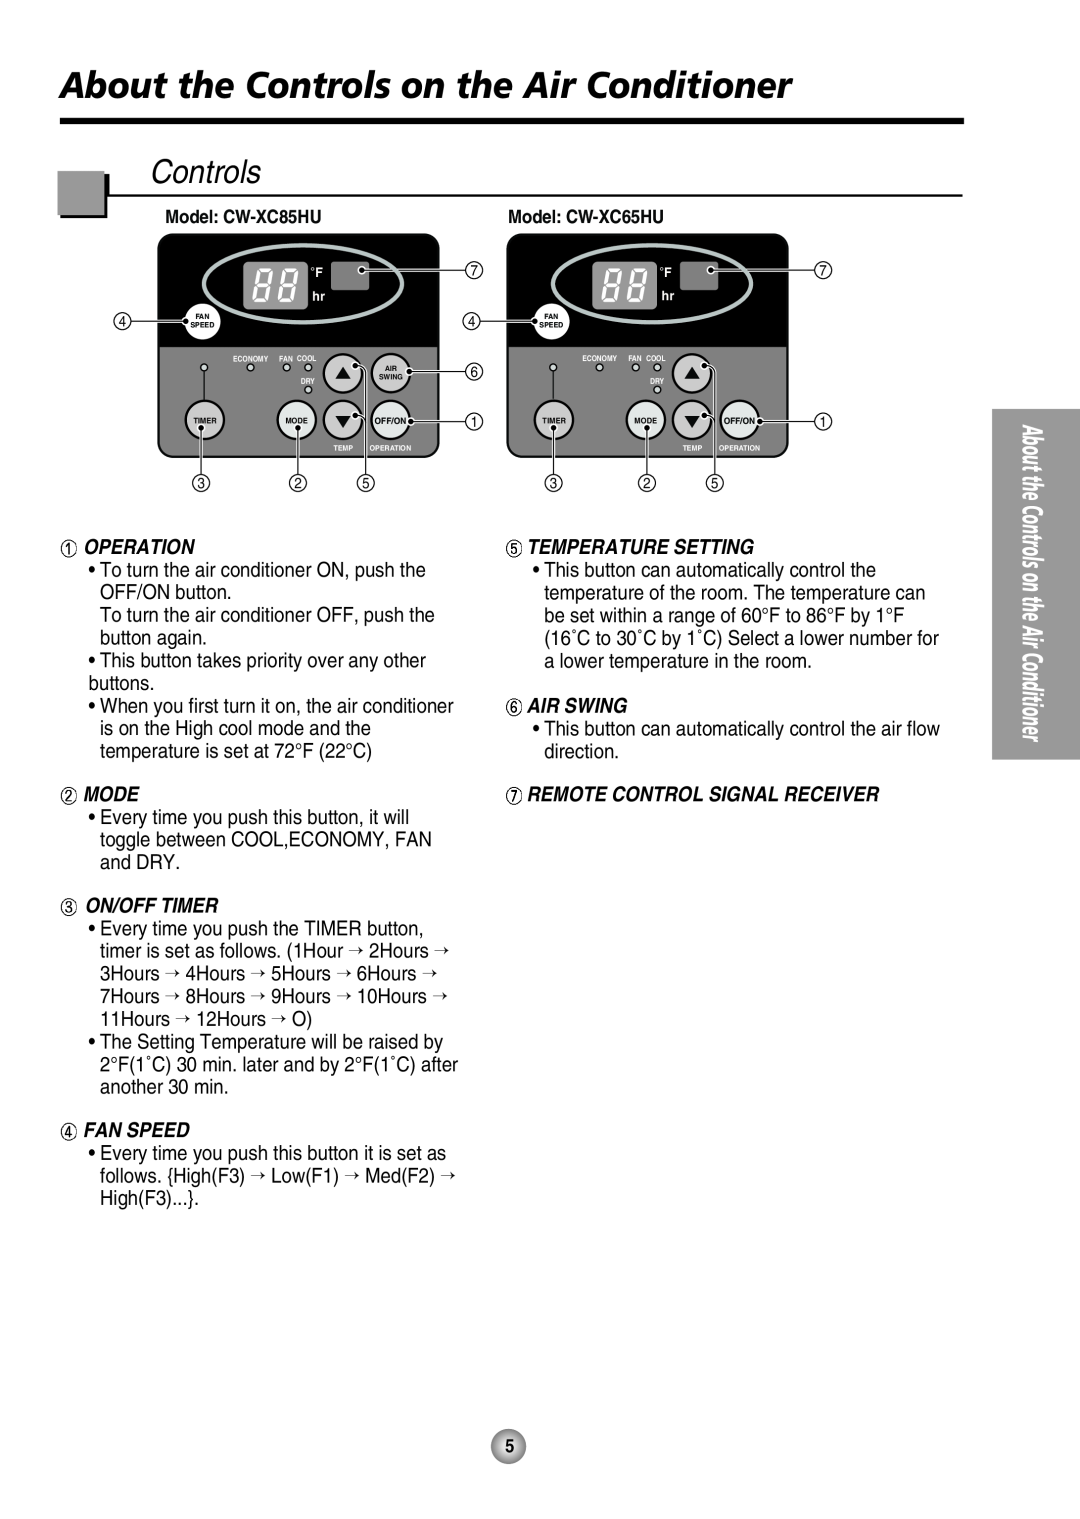 Panasonic CW-XC85HU manual About the Controls on the Air Conditioner, Operation, Mode, On/Off Timer, Fan Speed, Air Swing 